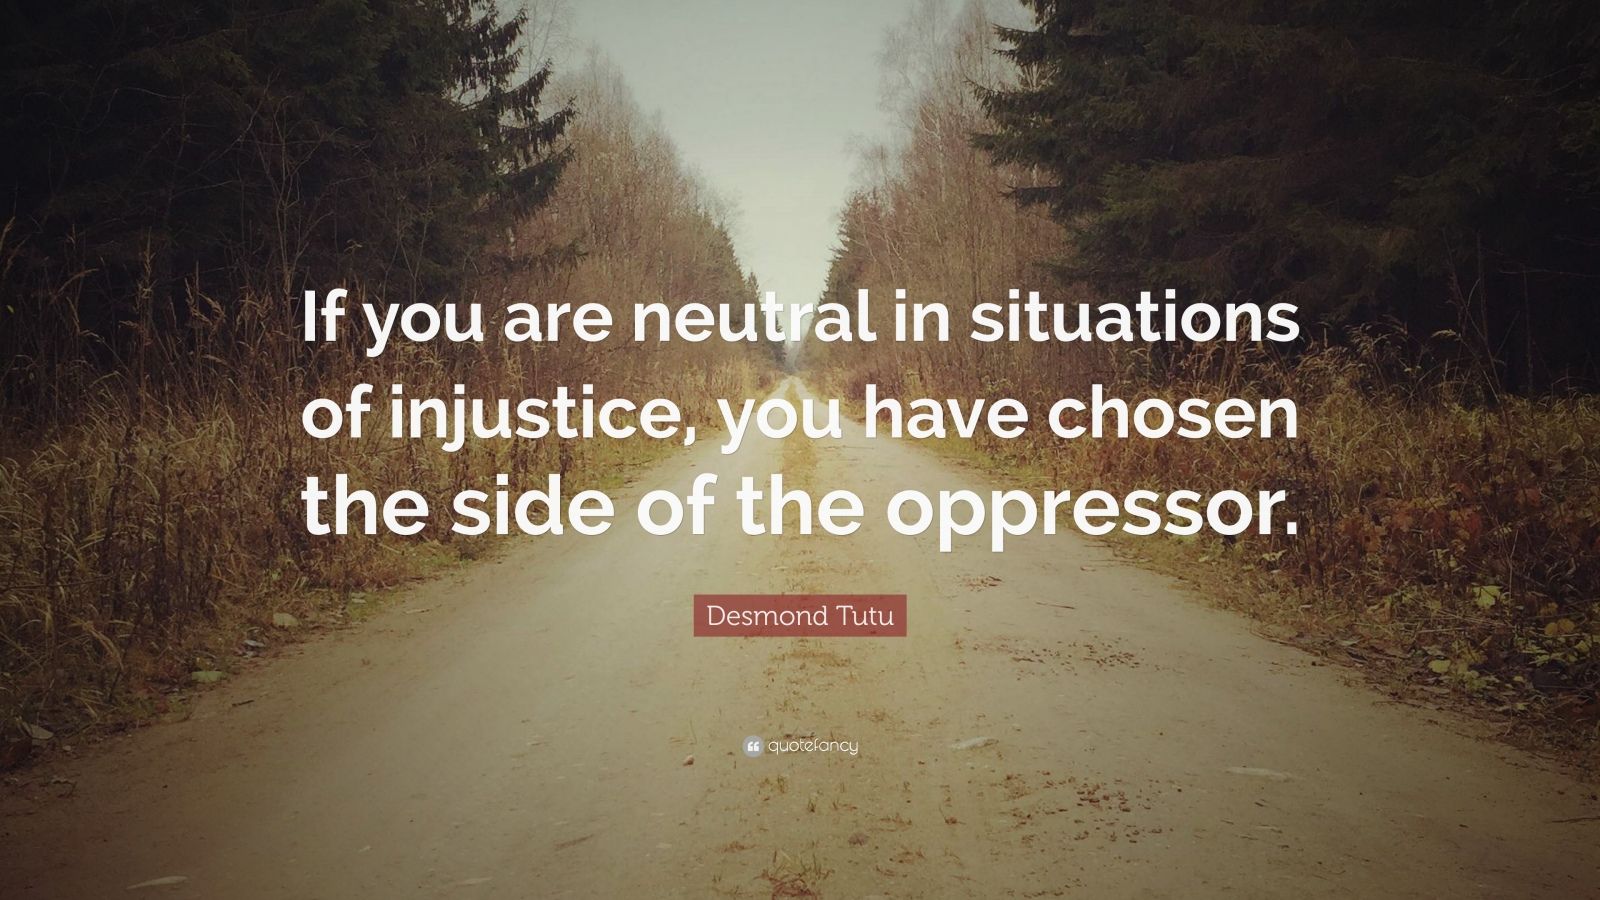 Desmond Tutu Quote: “If you are neutral in situations of injustice, you